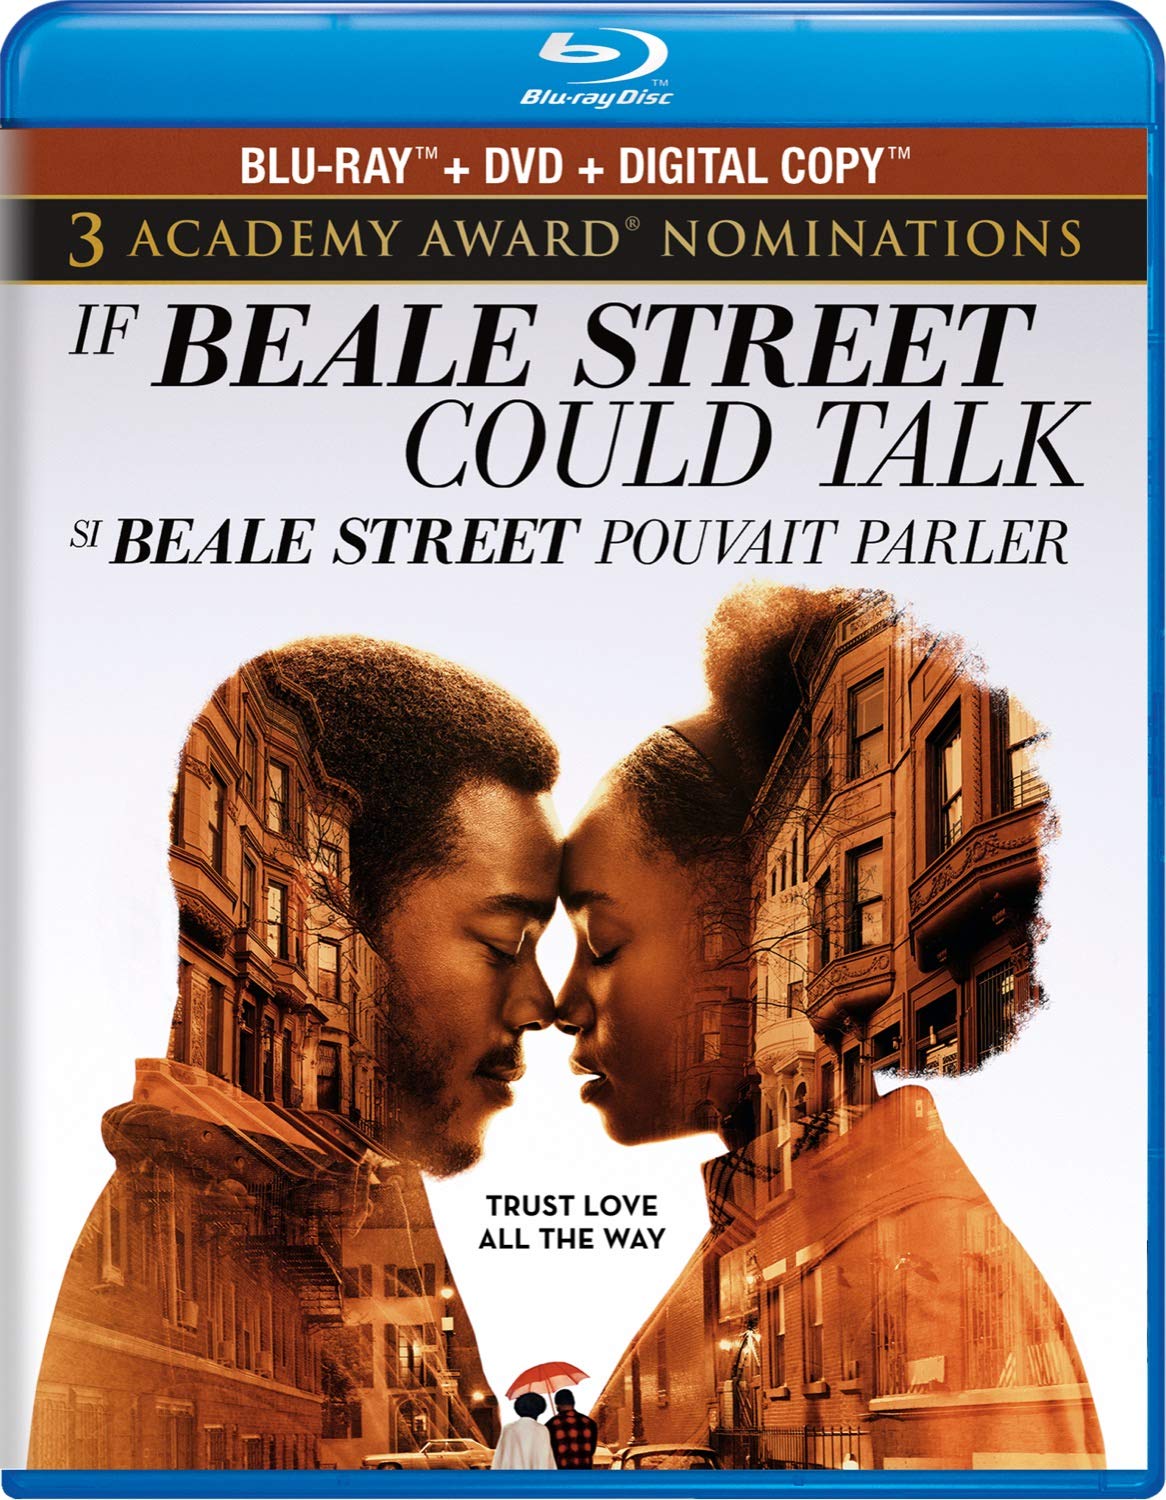 If Beale Street Could Talk (Bluray/DVD Combo) [BluRay]